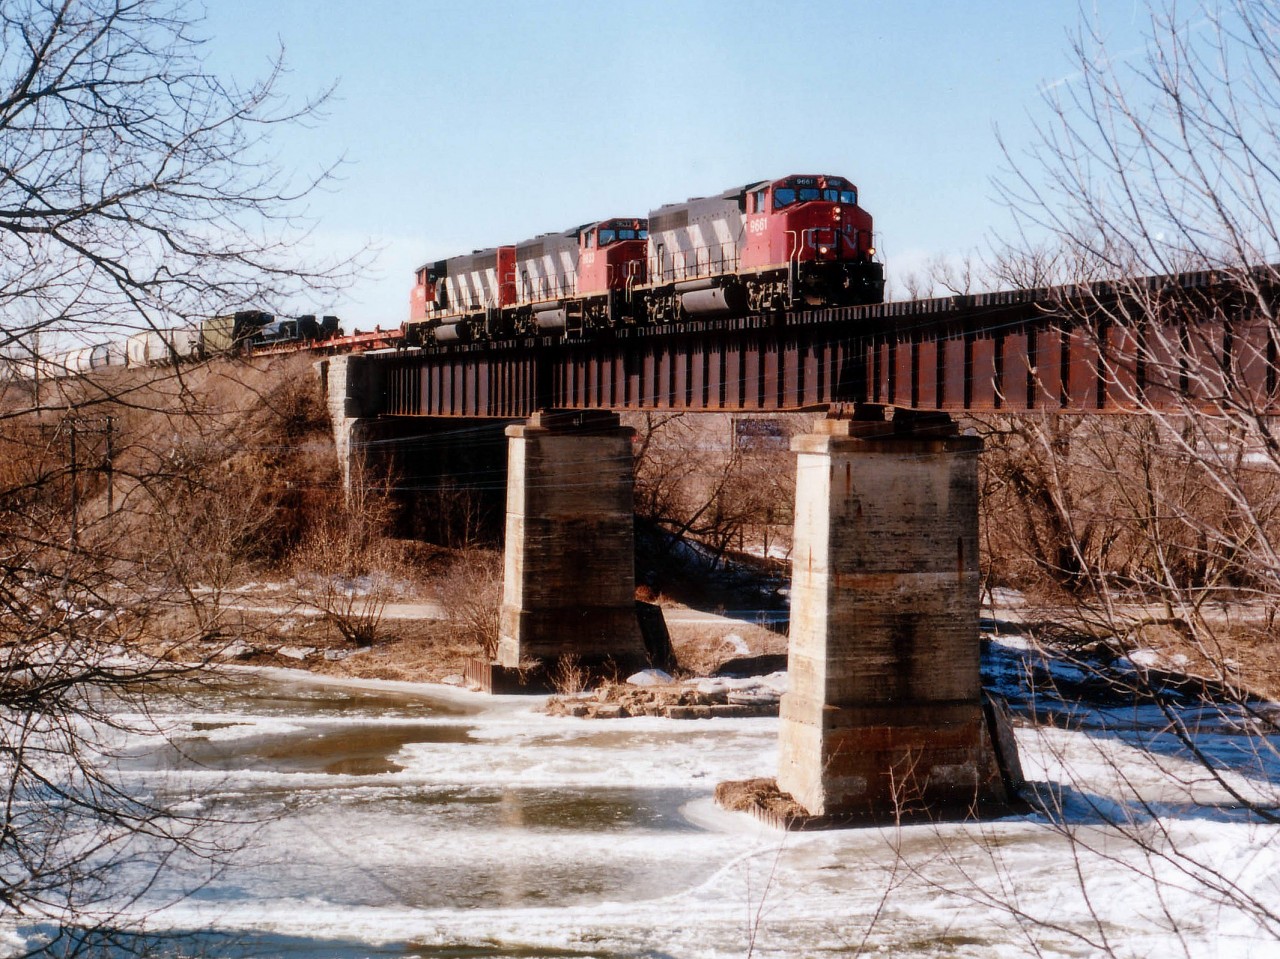 The GEXR expanded from its original startup in 1992 for the first time on November 16, 1998 with the acquisition of the CN Guelph Subdivision. The line brought in 6 units from other RaiLink roads for the takeover. The usual power problems resulted in GEXR leasing for brief periods units from the CN as well, thirty days at a time, I'm told. February 1999 was the only month the three in this image were together. And this was one of the rare times I was able to successfully snag a shot of a train rolling over the Grand River bridge. A lot of chopping, sawing and weeding preceded this event. Nowadays this area is all housing.......CN 9661, 9633 and 9643 power eastward toward Mac Yd from Stratford; I was a bit peeved there was no genuine GEXR loco in the consist, but one takes what one is offered. It looks to be a regular pre-GEXR train of the CN, but it isn't. It IS part of history though.